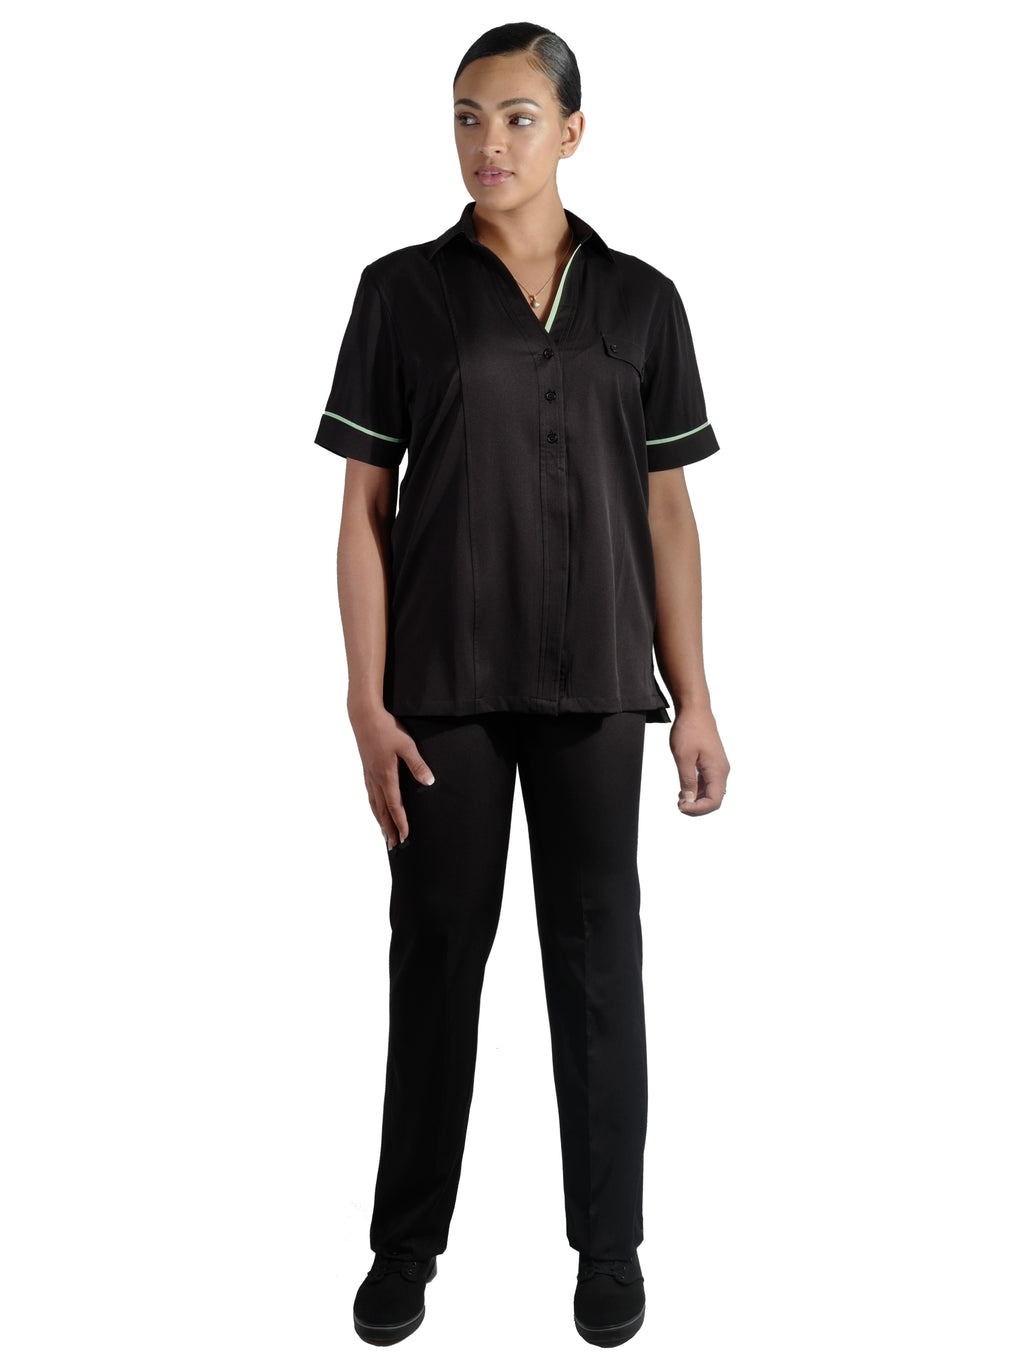 Black and Green Housekeeping Tunic